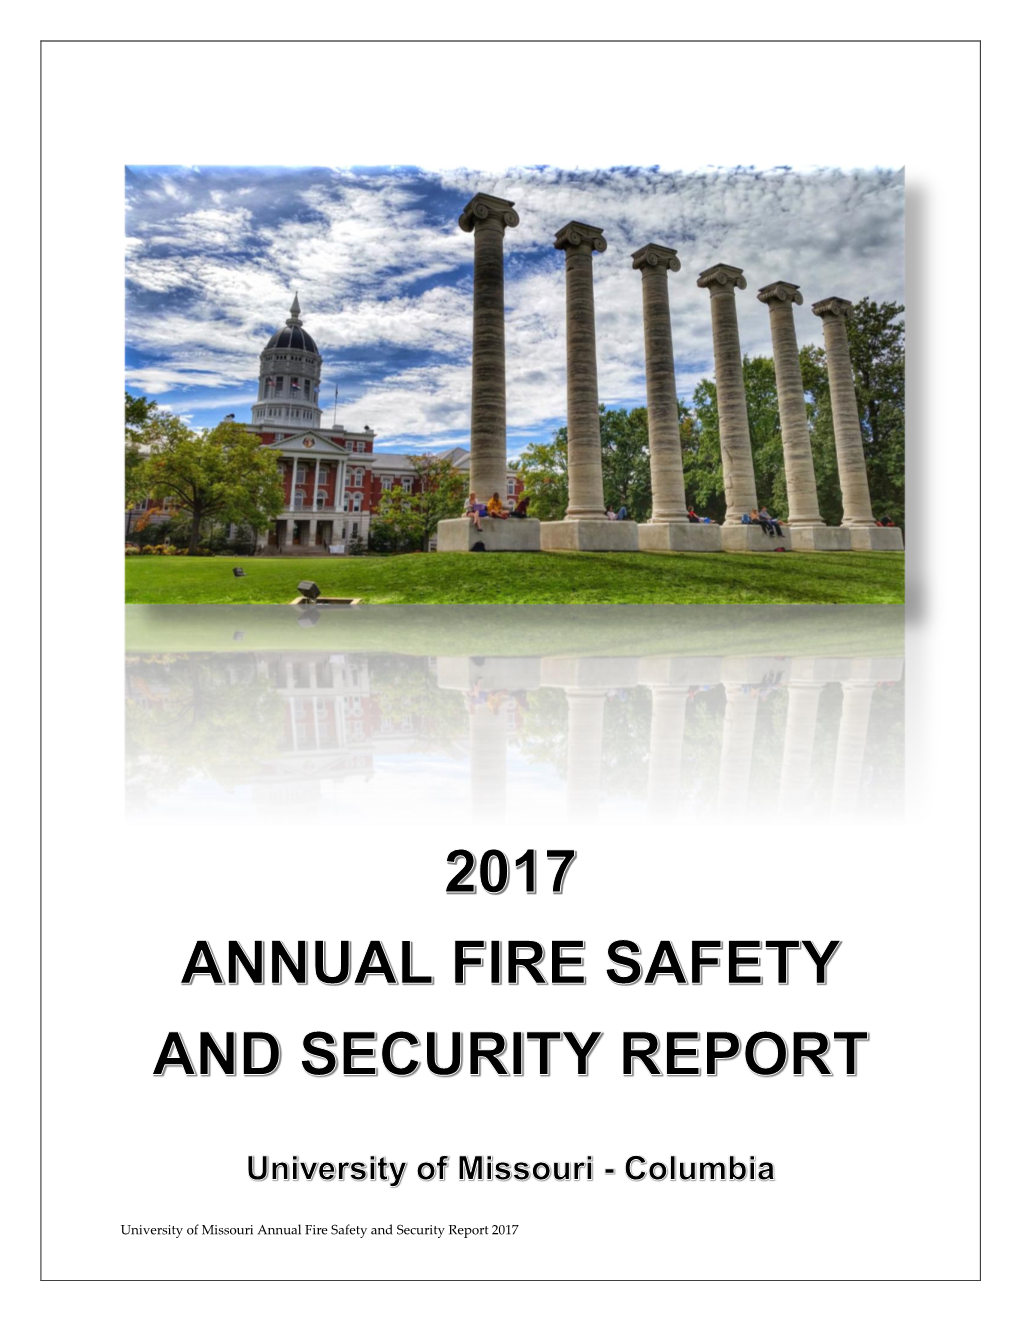 University of Missouri Annual Fire Safety and Security Report 2017